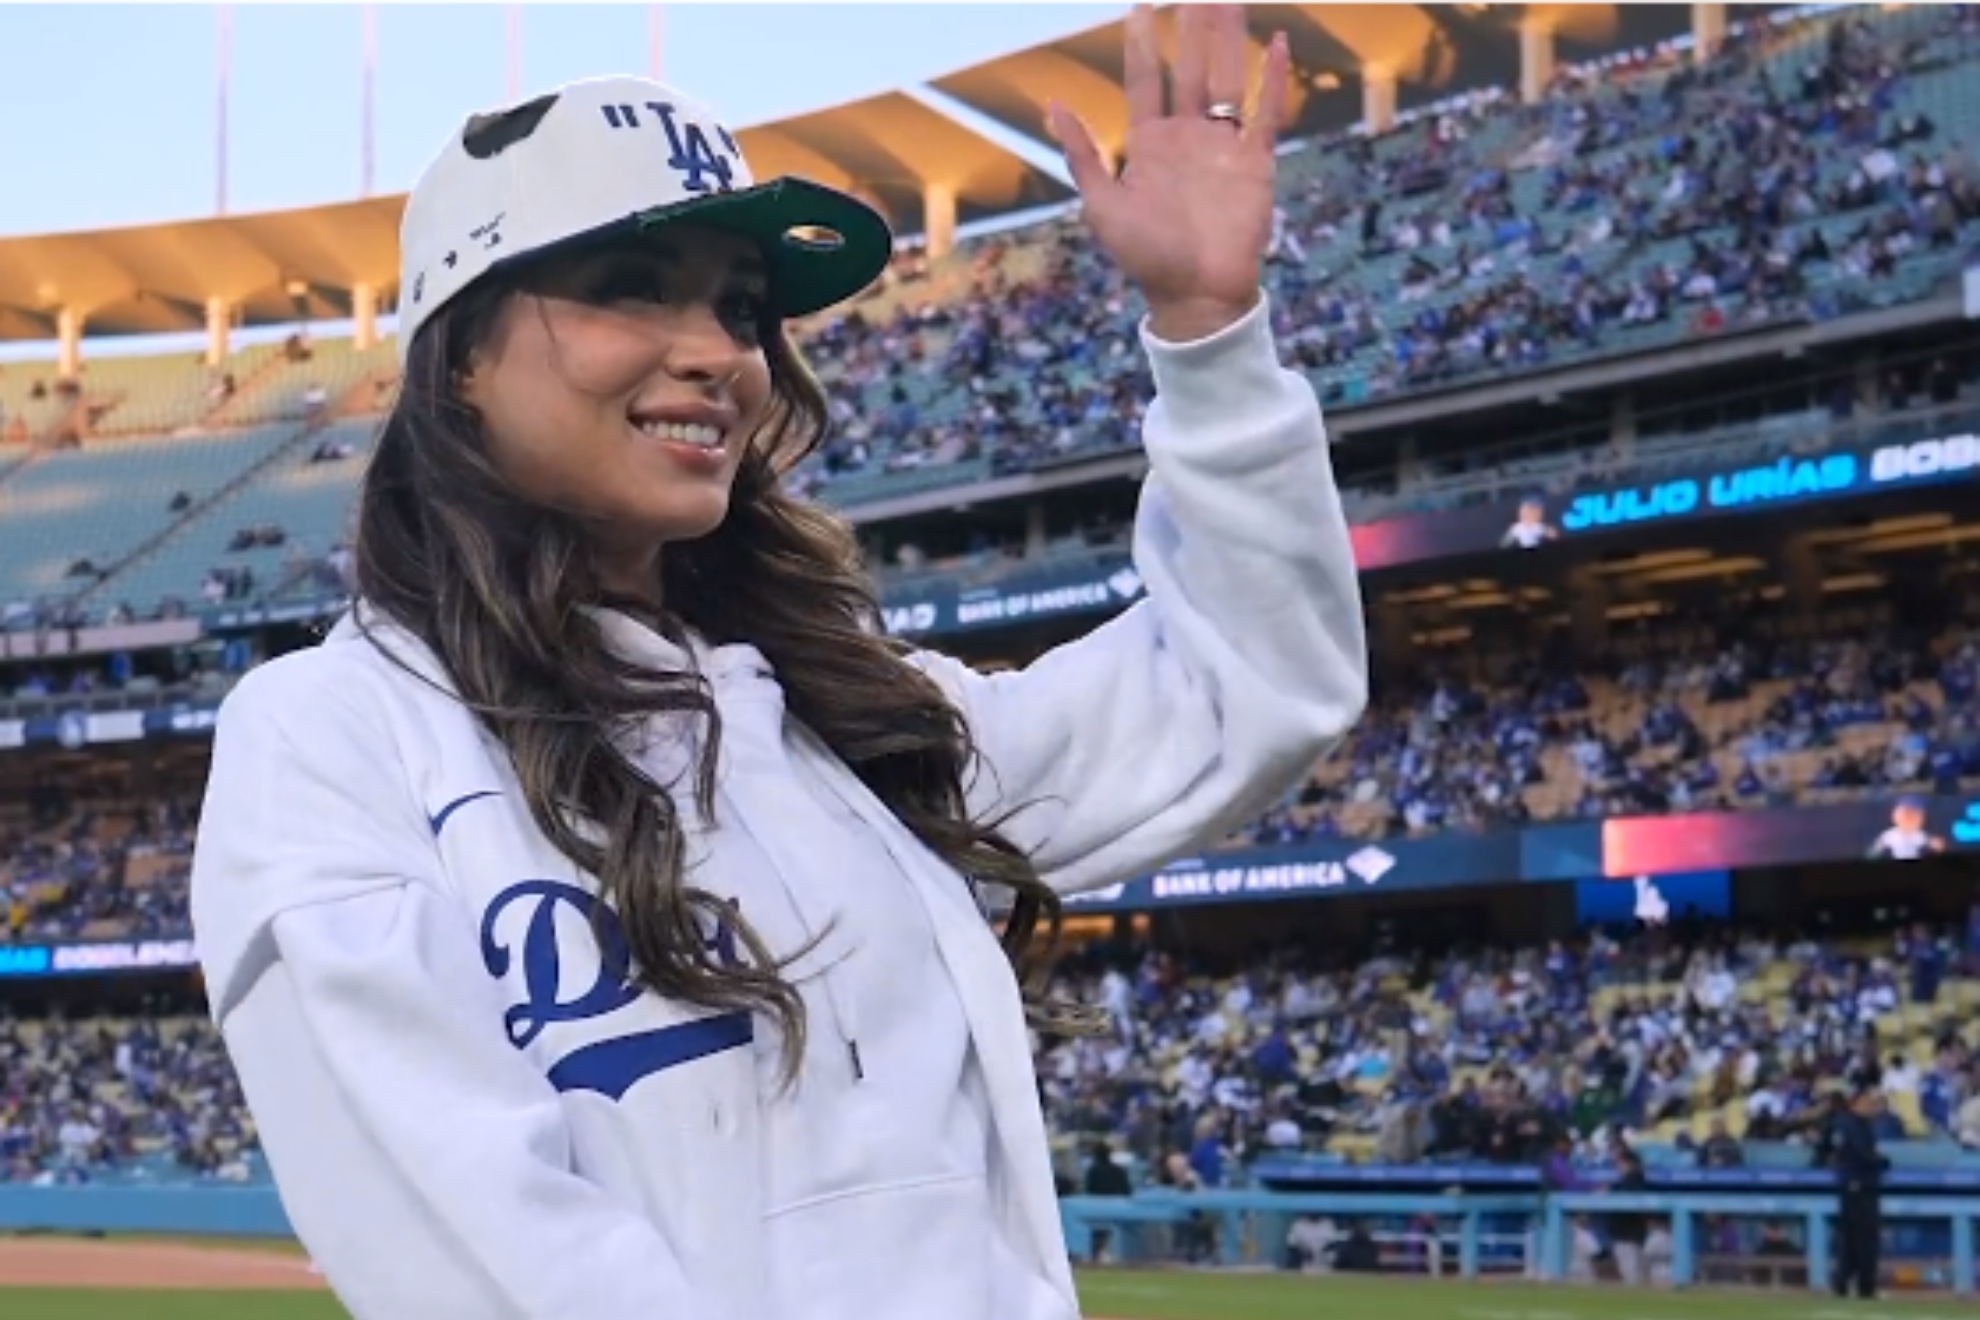 Kobe Bryant's daughter Natalia impresses Mookie Betts with first pitch